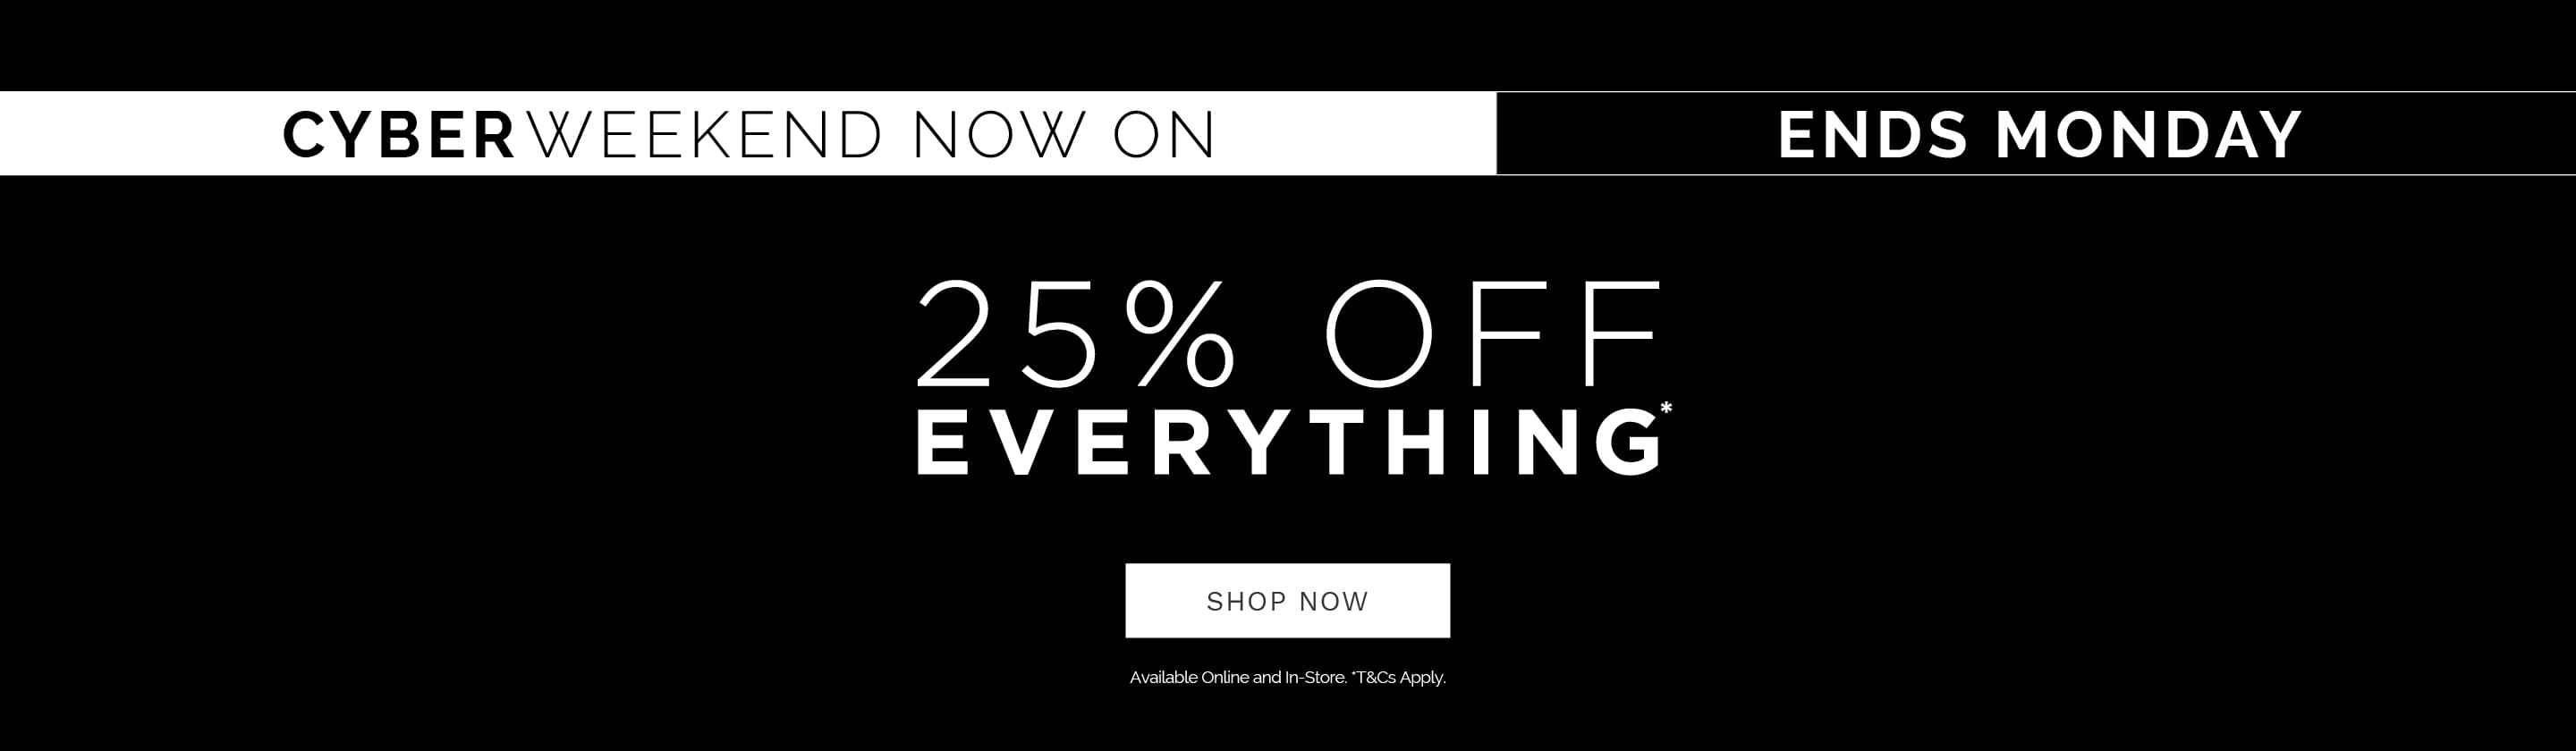 Cyber Weekend 25% Off Everything